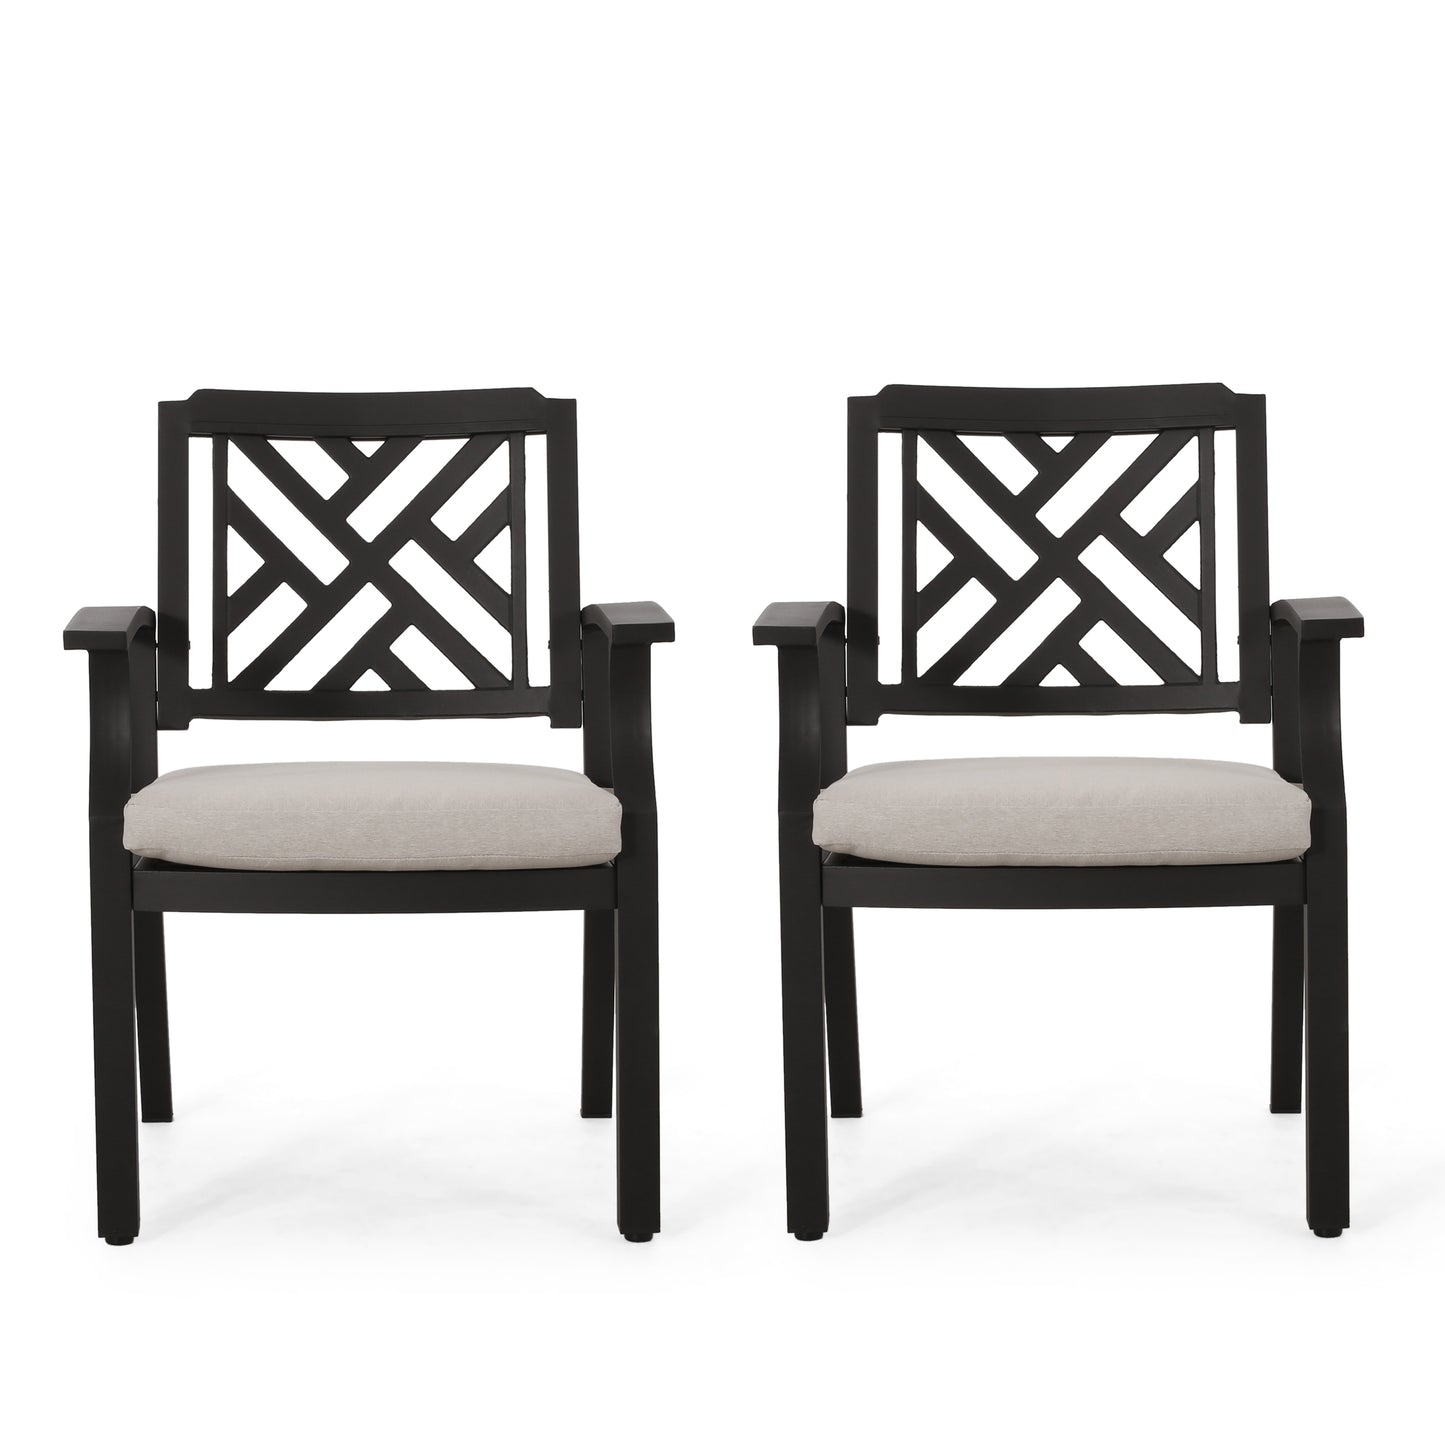 Arlene Waterford Outdoor Aluminum Dining Chairs, Set of 2